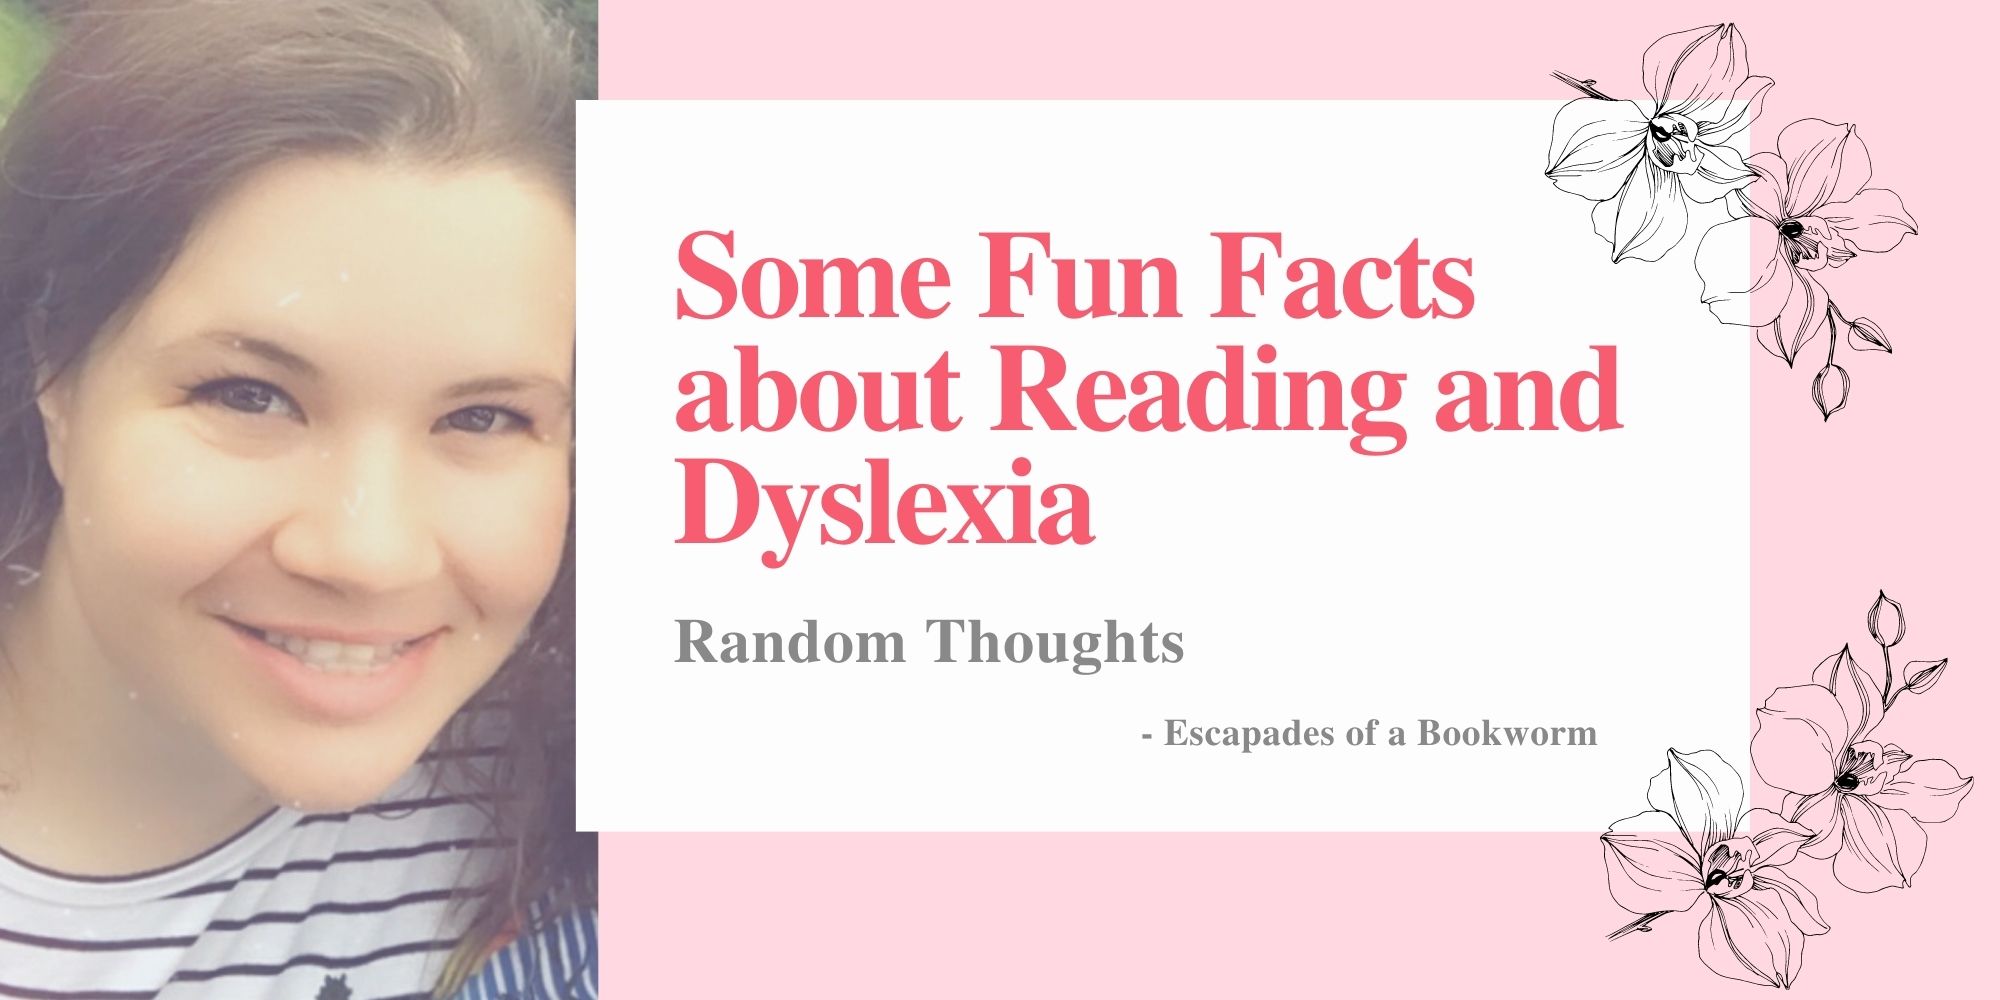 Random Thoughts Some Fun Facts about Reading and Dyslexia